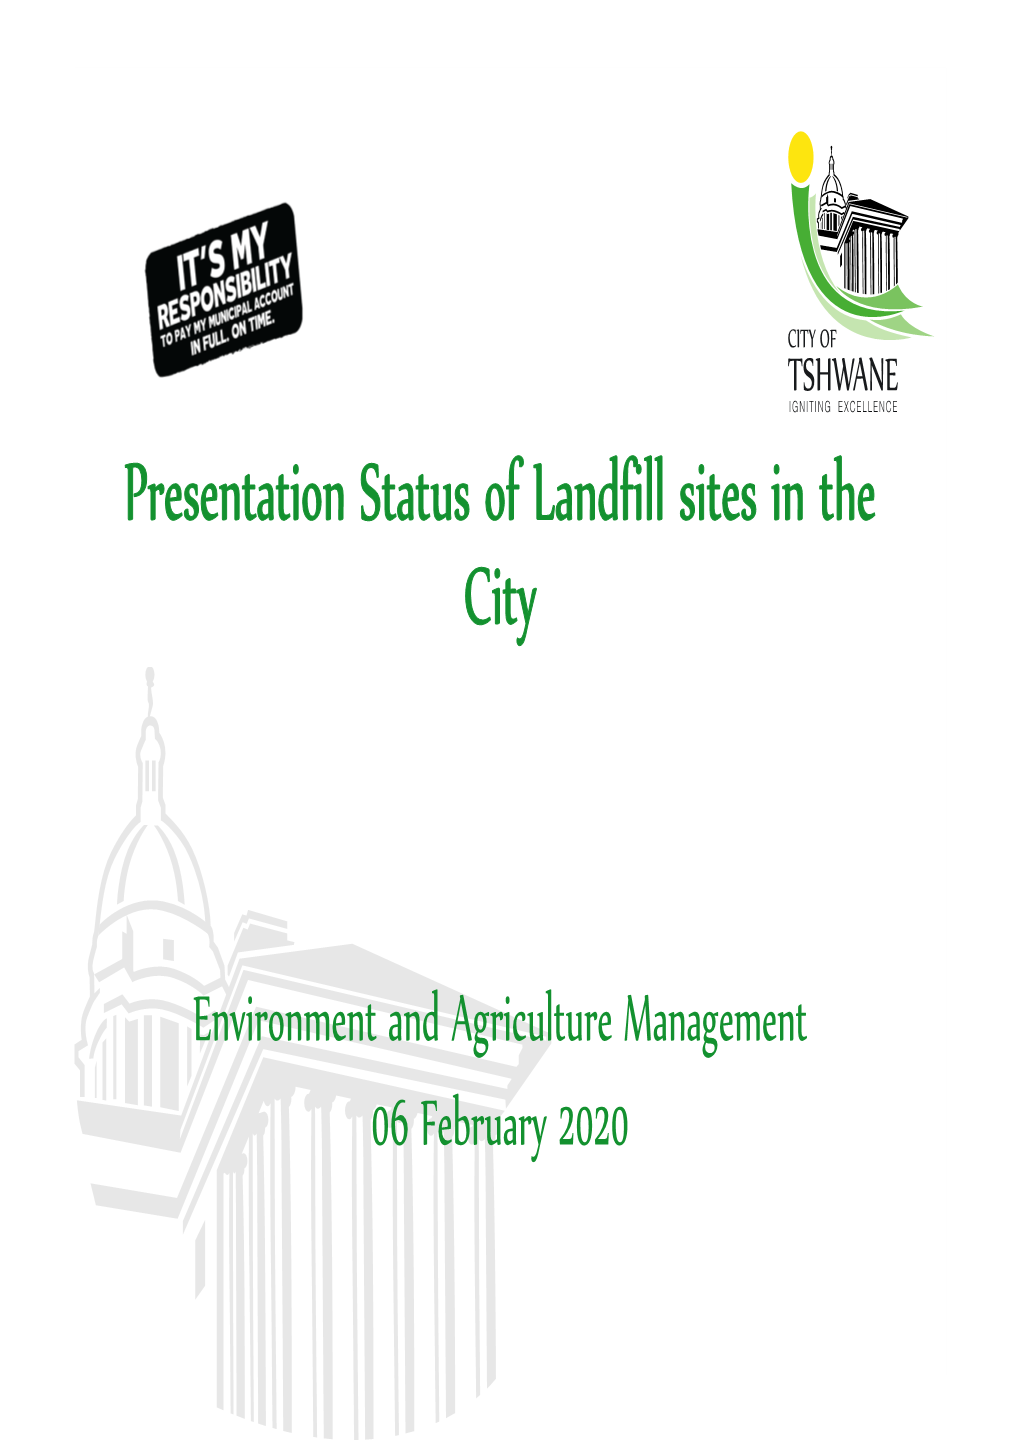 Presentation Status of Landfill Sites in the City